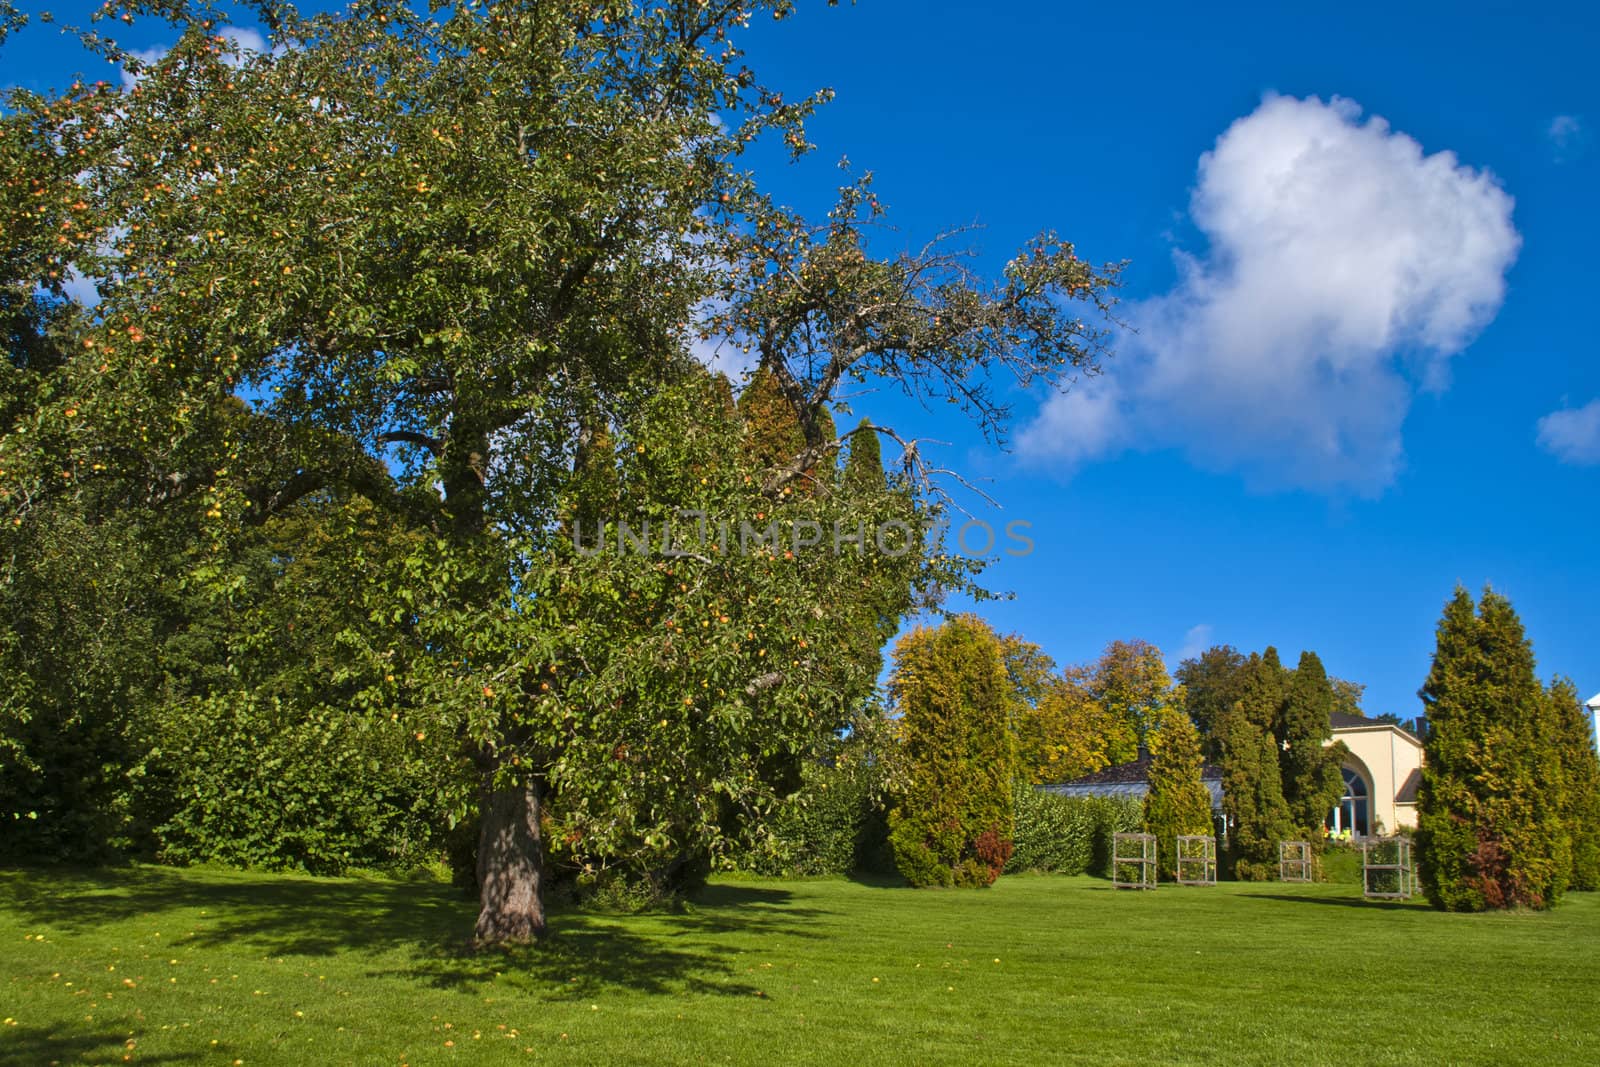 picture shows a part of the garden of red mansion in halden with a huge apple tree in the foreground and various shrubs and trees in the background picture is shot in october 2012.